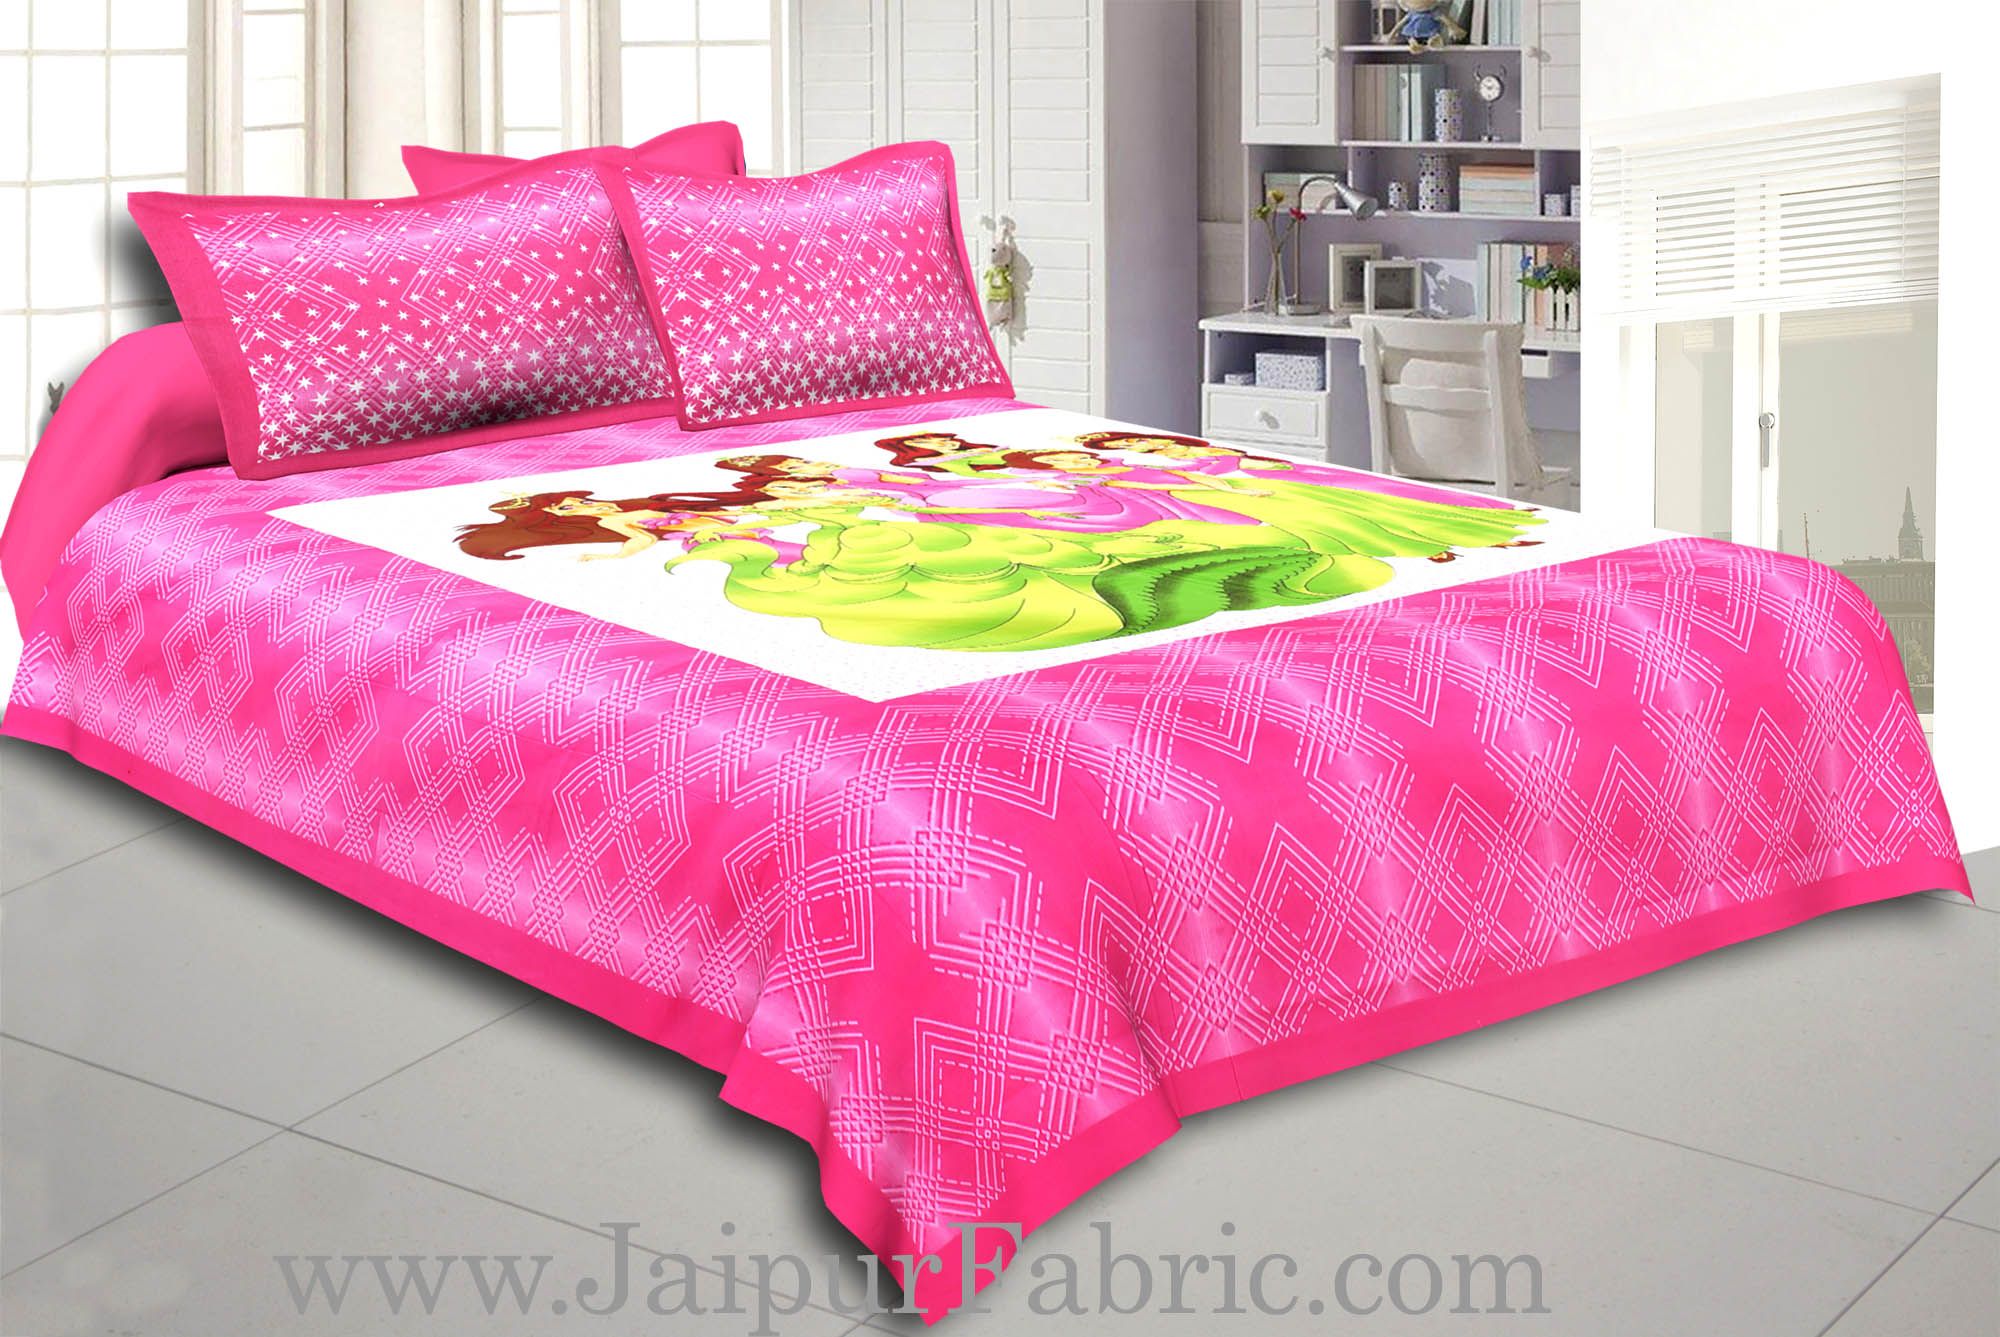 Dark Pink Barbie Doll Cotton Double Bed Sheet